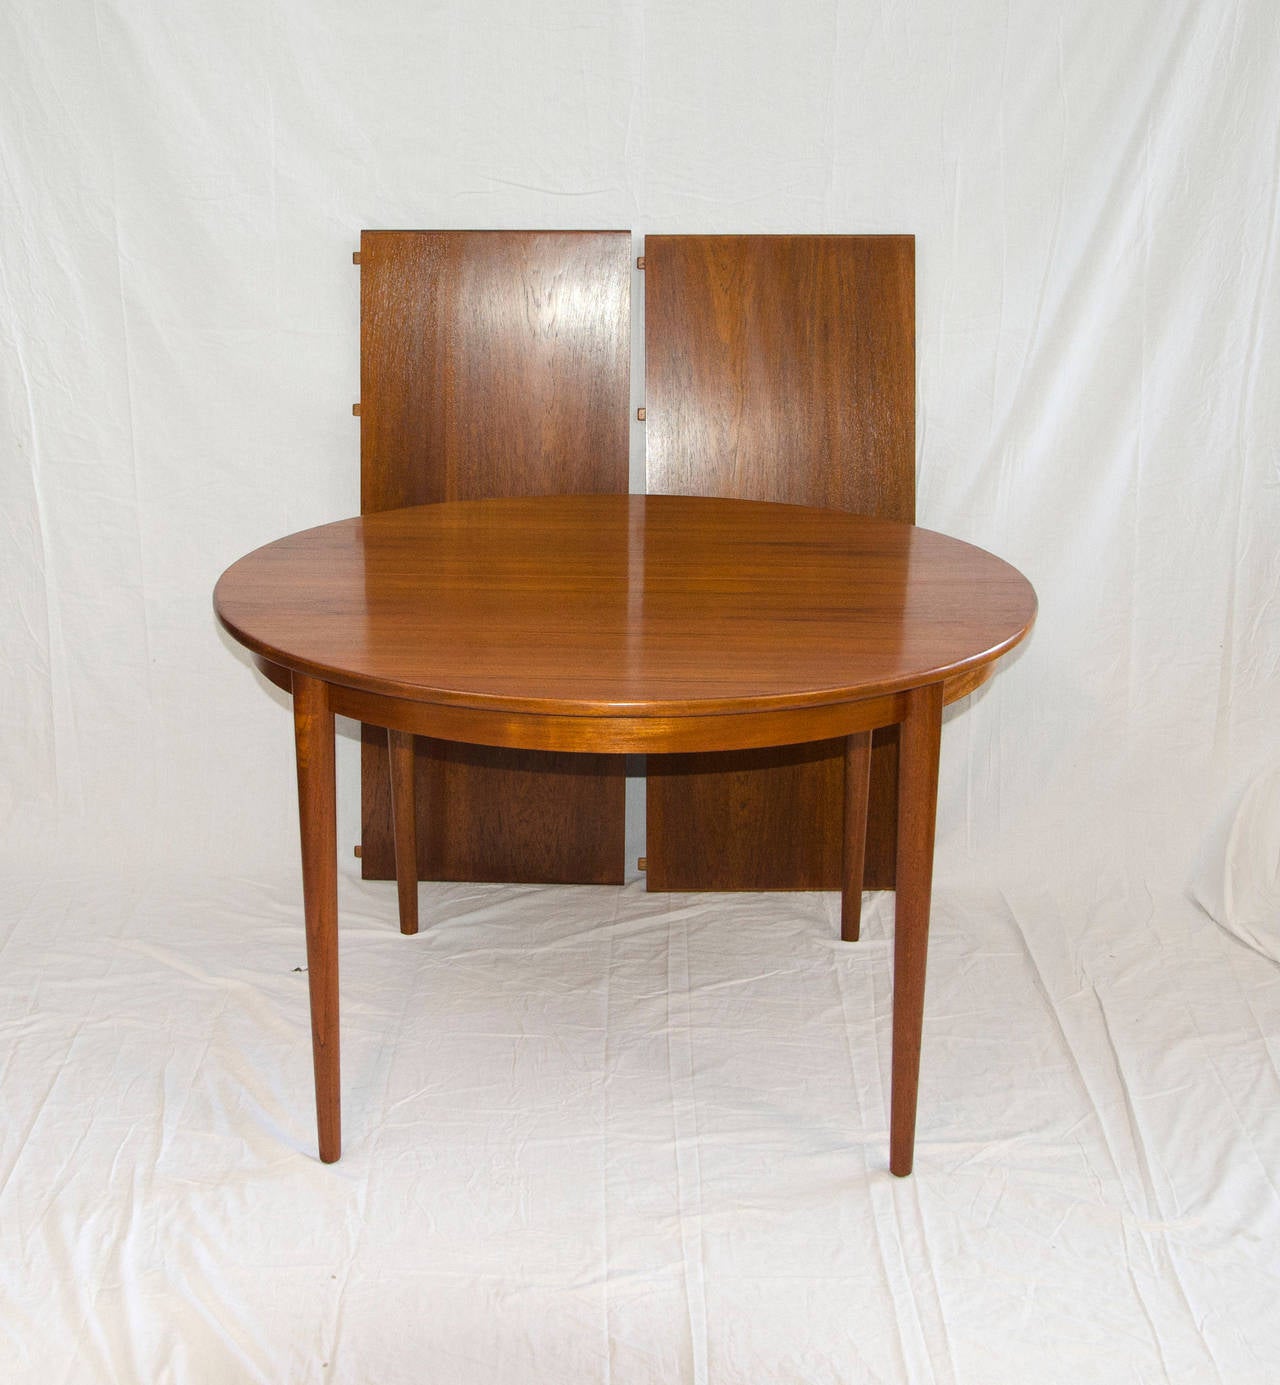 20th Century Danish Round Teak Dining Table with Two Leaves by Moreddi